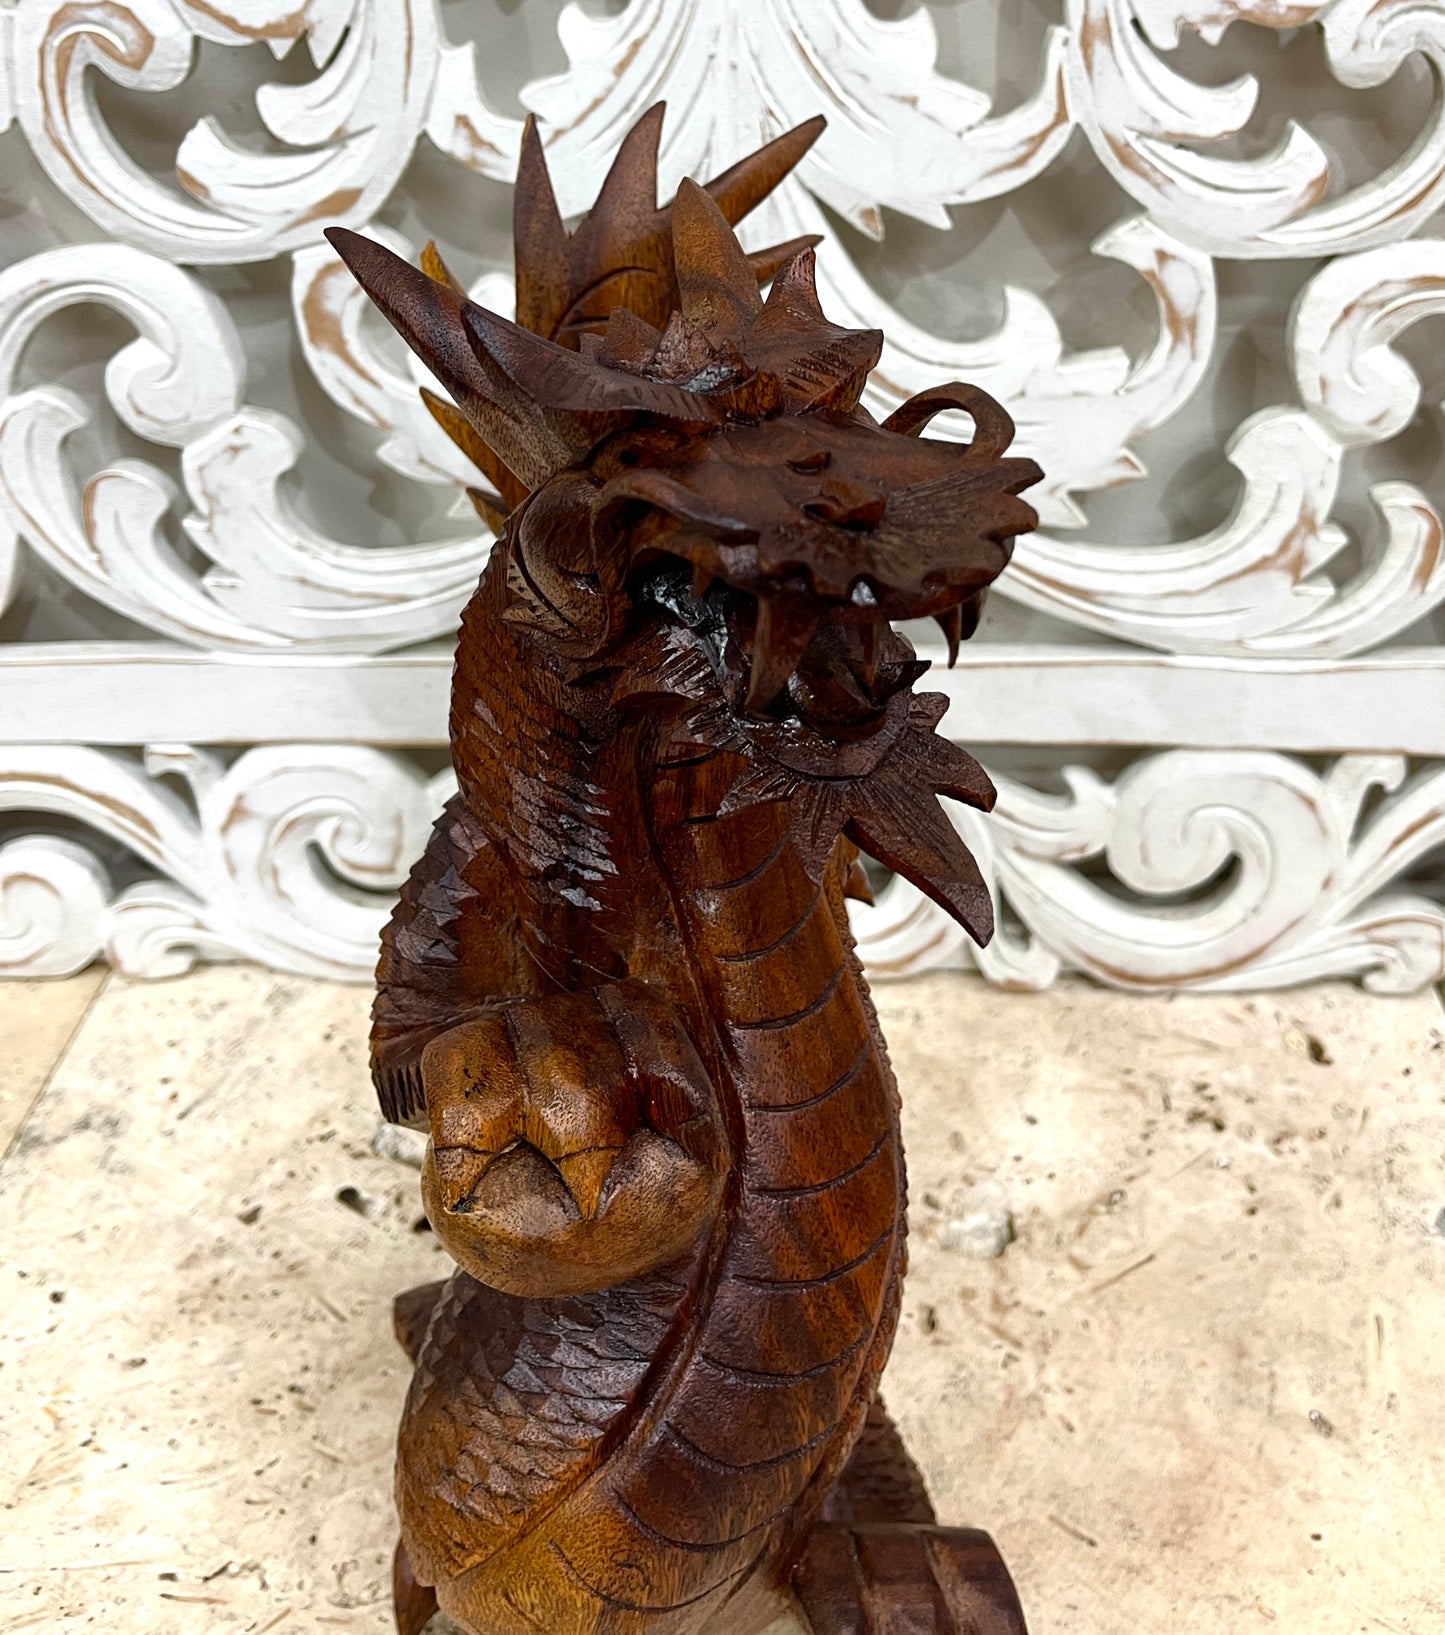 Dragon Intricate Wood Carvings - 3 Sizes